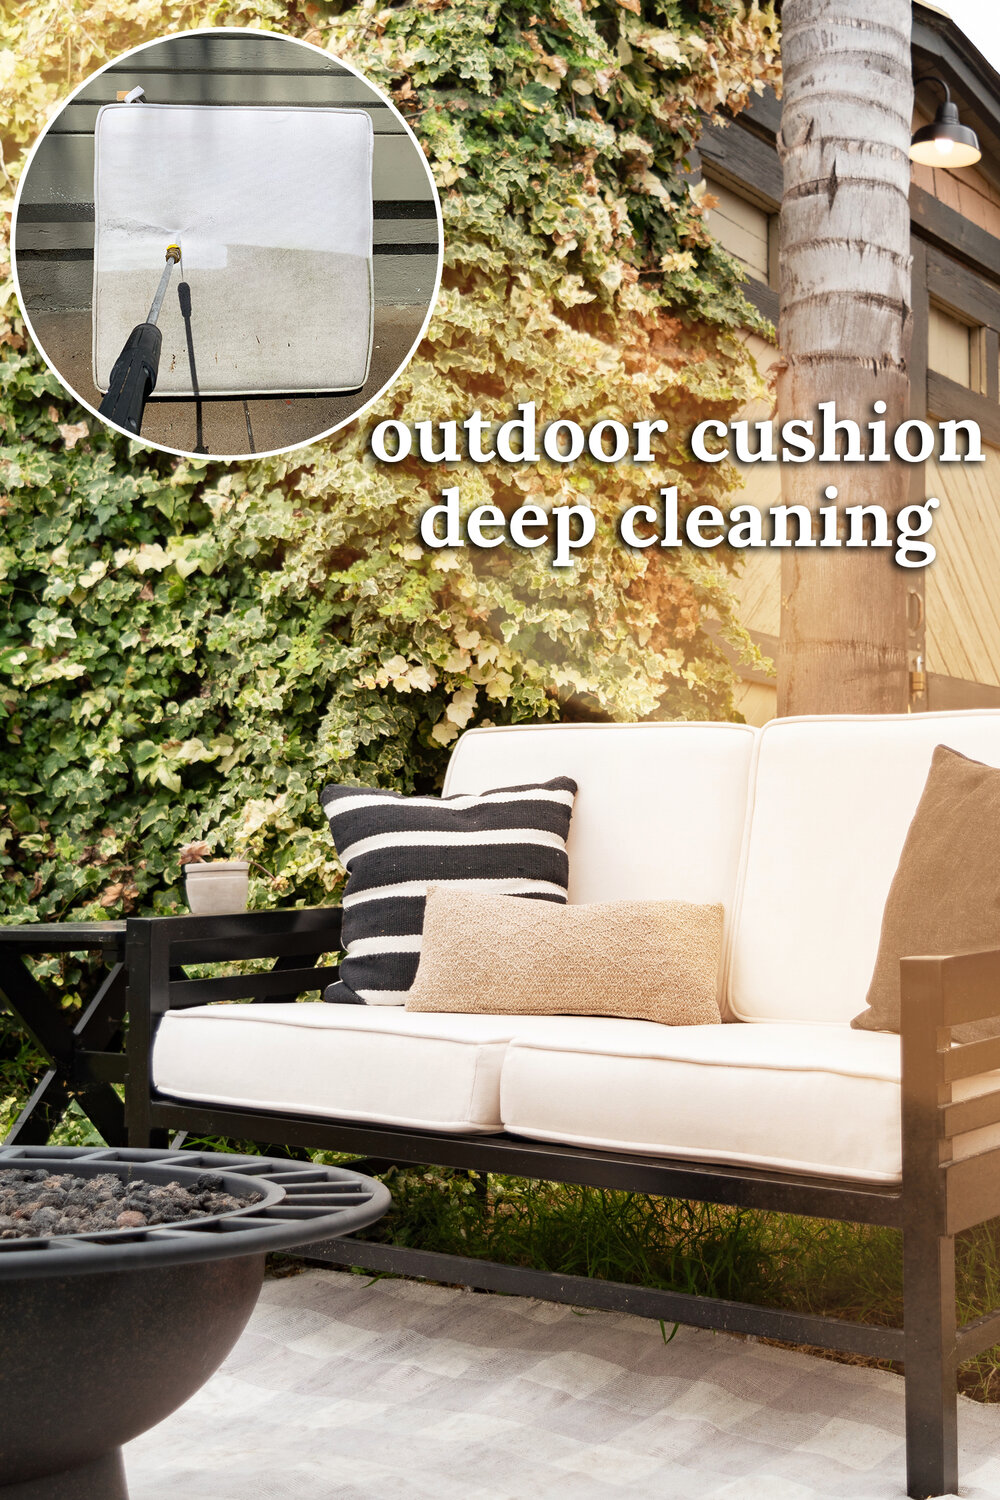 Pressure Washing My Outdoor Cushions, How To Wash White Outdoor Cushions